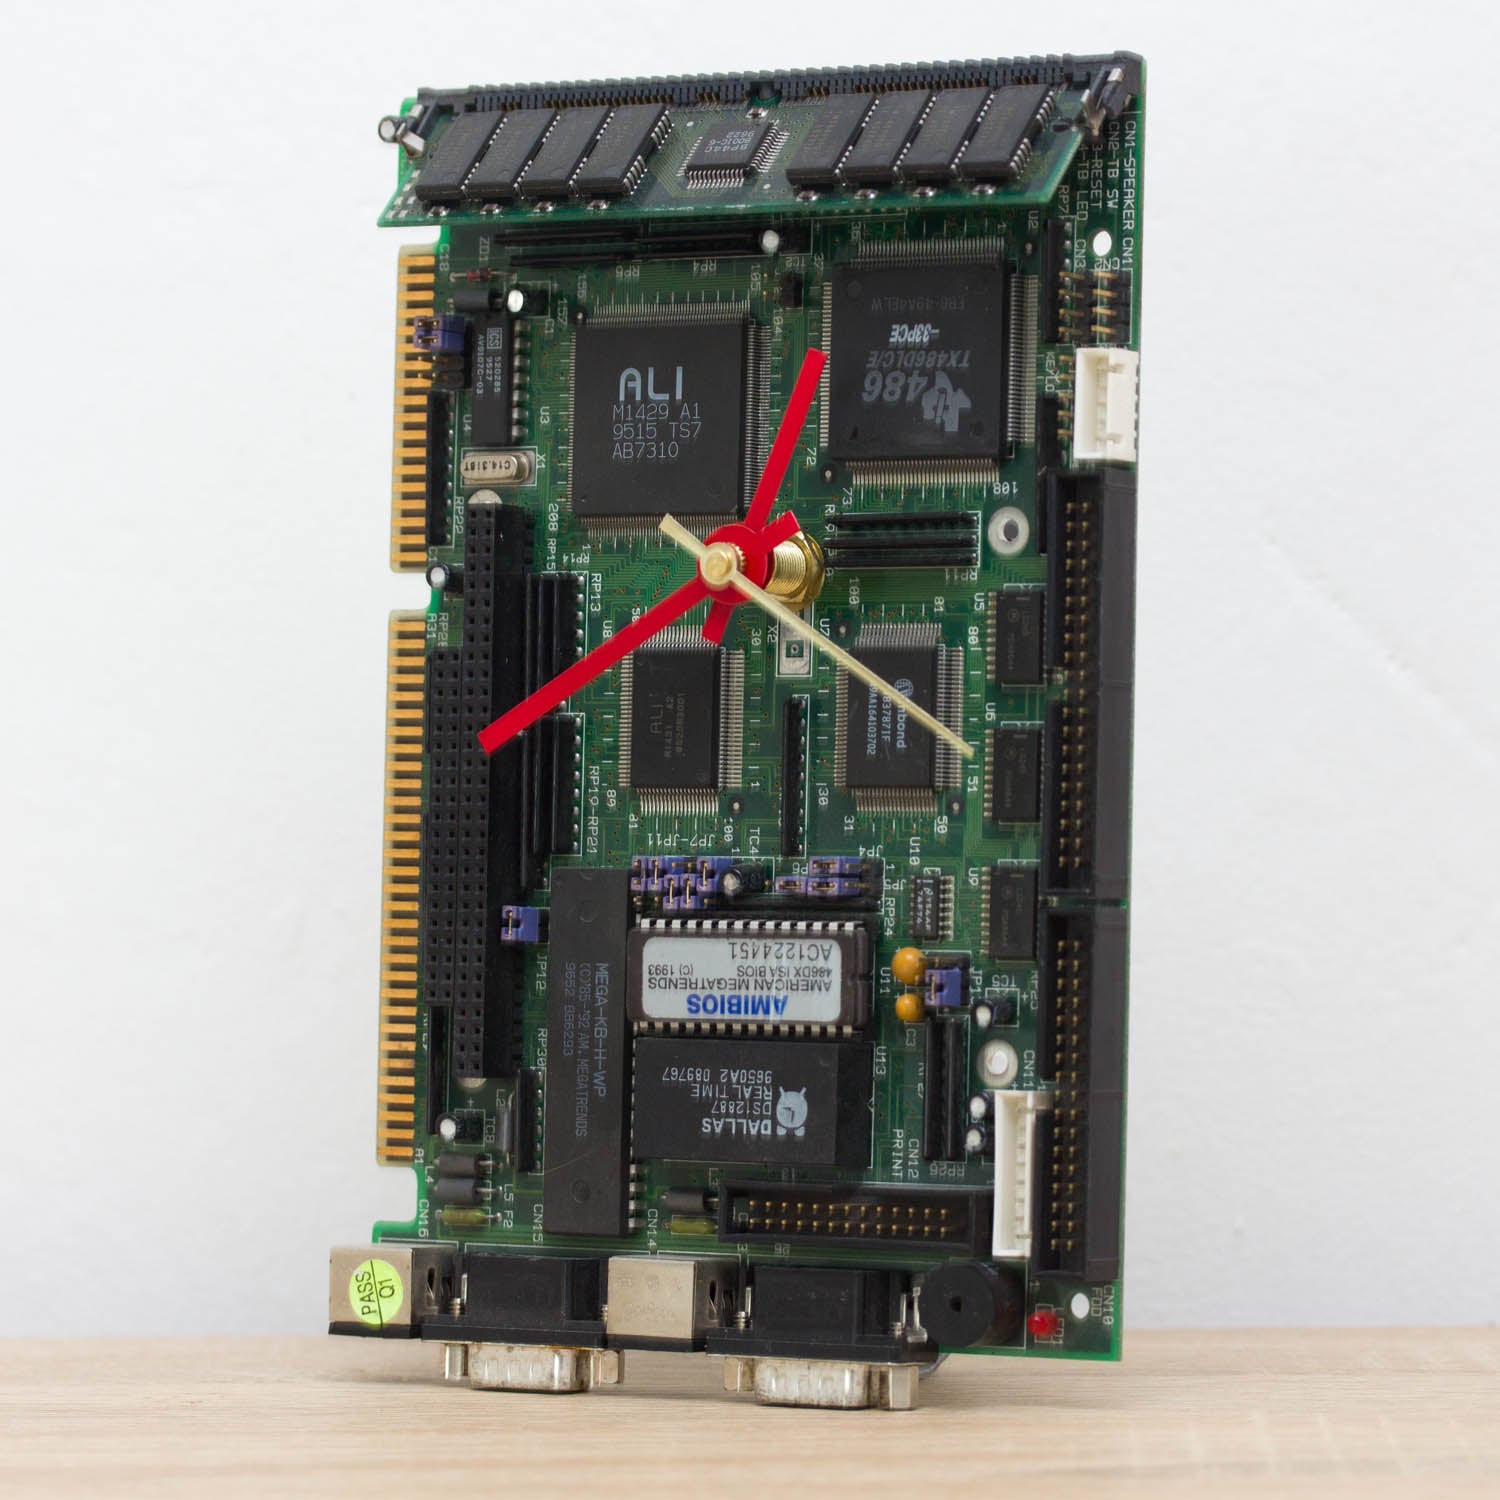 Techie Desk clock made of an old circuit board